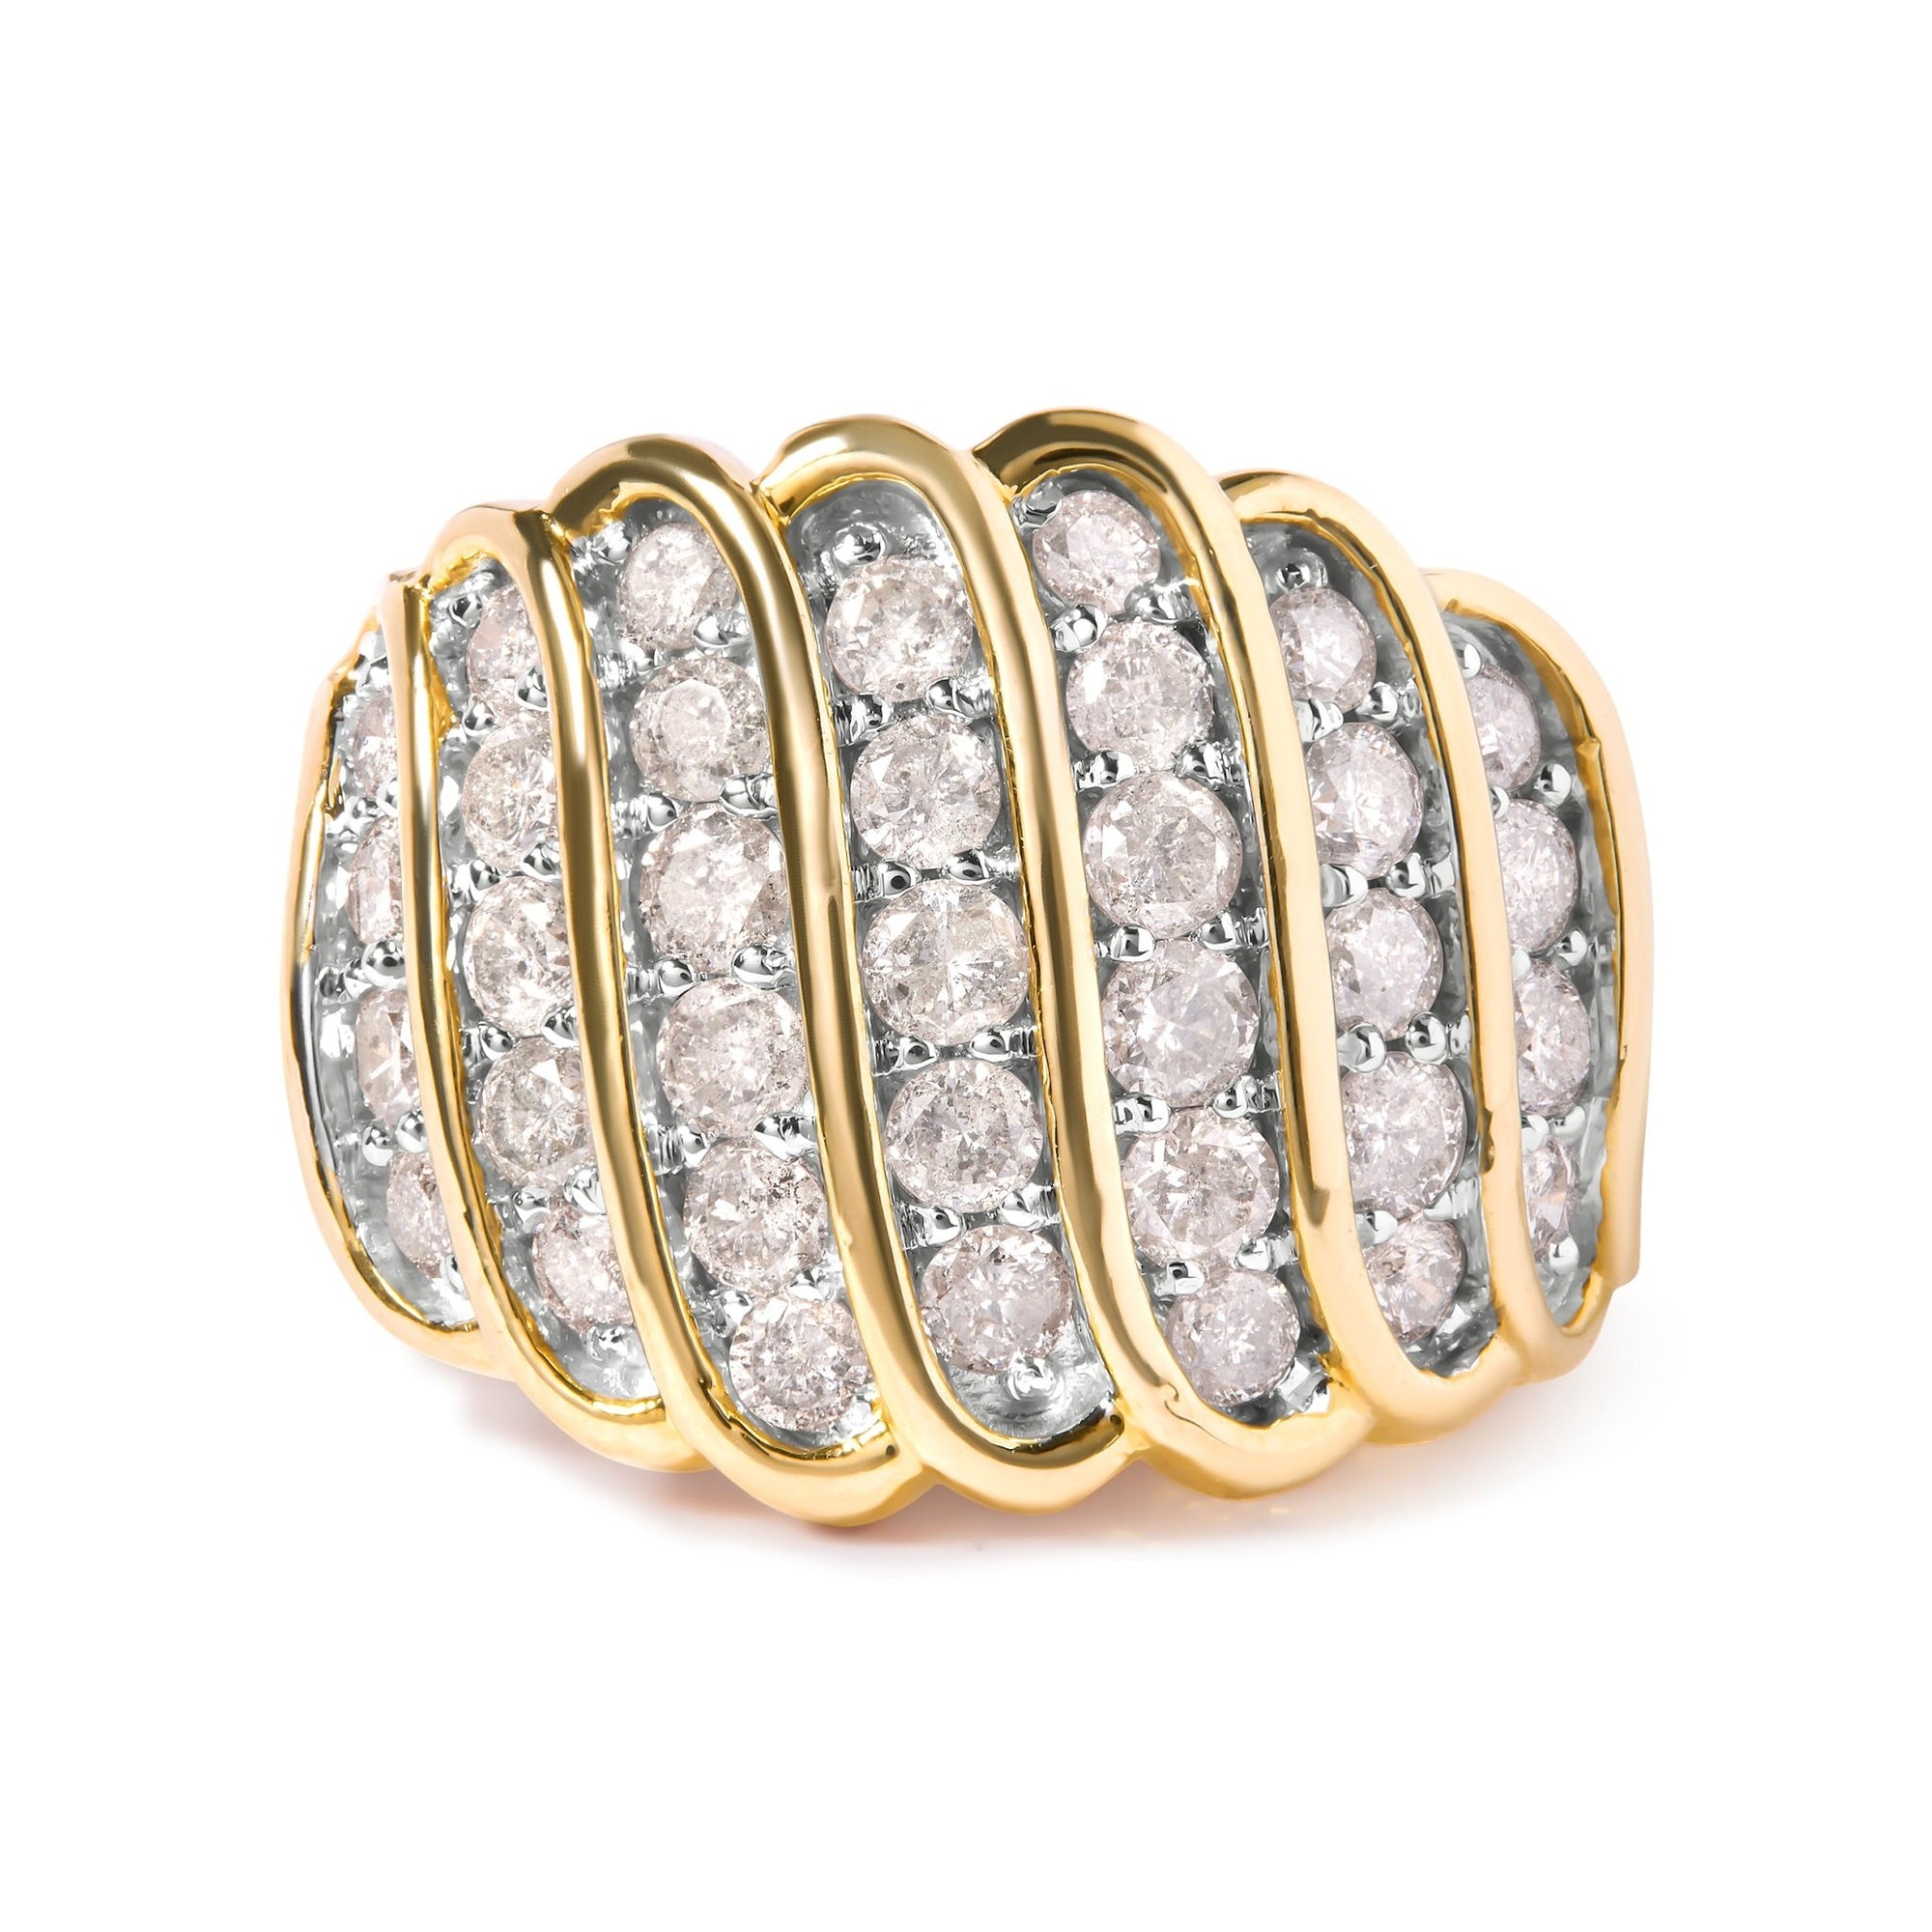 10 Yellow Gold 2.00 Cttw Diamond Multi Row Cocktail Band Ring (I-J Color, I1-I2 Clarity) - Ring Size 7 - LinkagejewelrydesignLinkagejewelrydesign